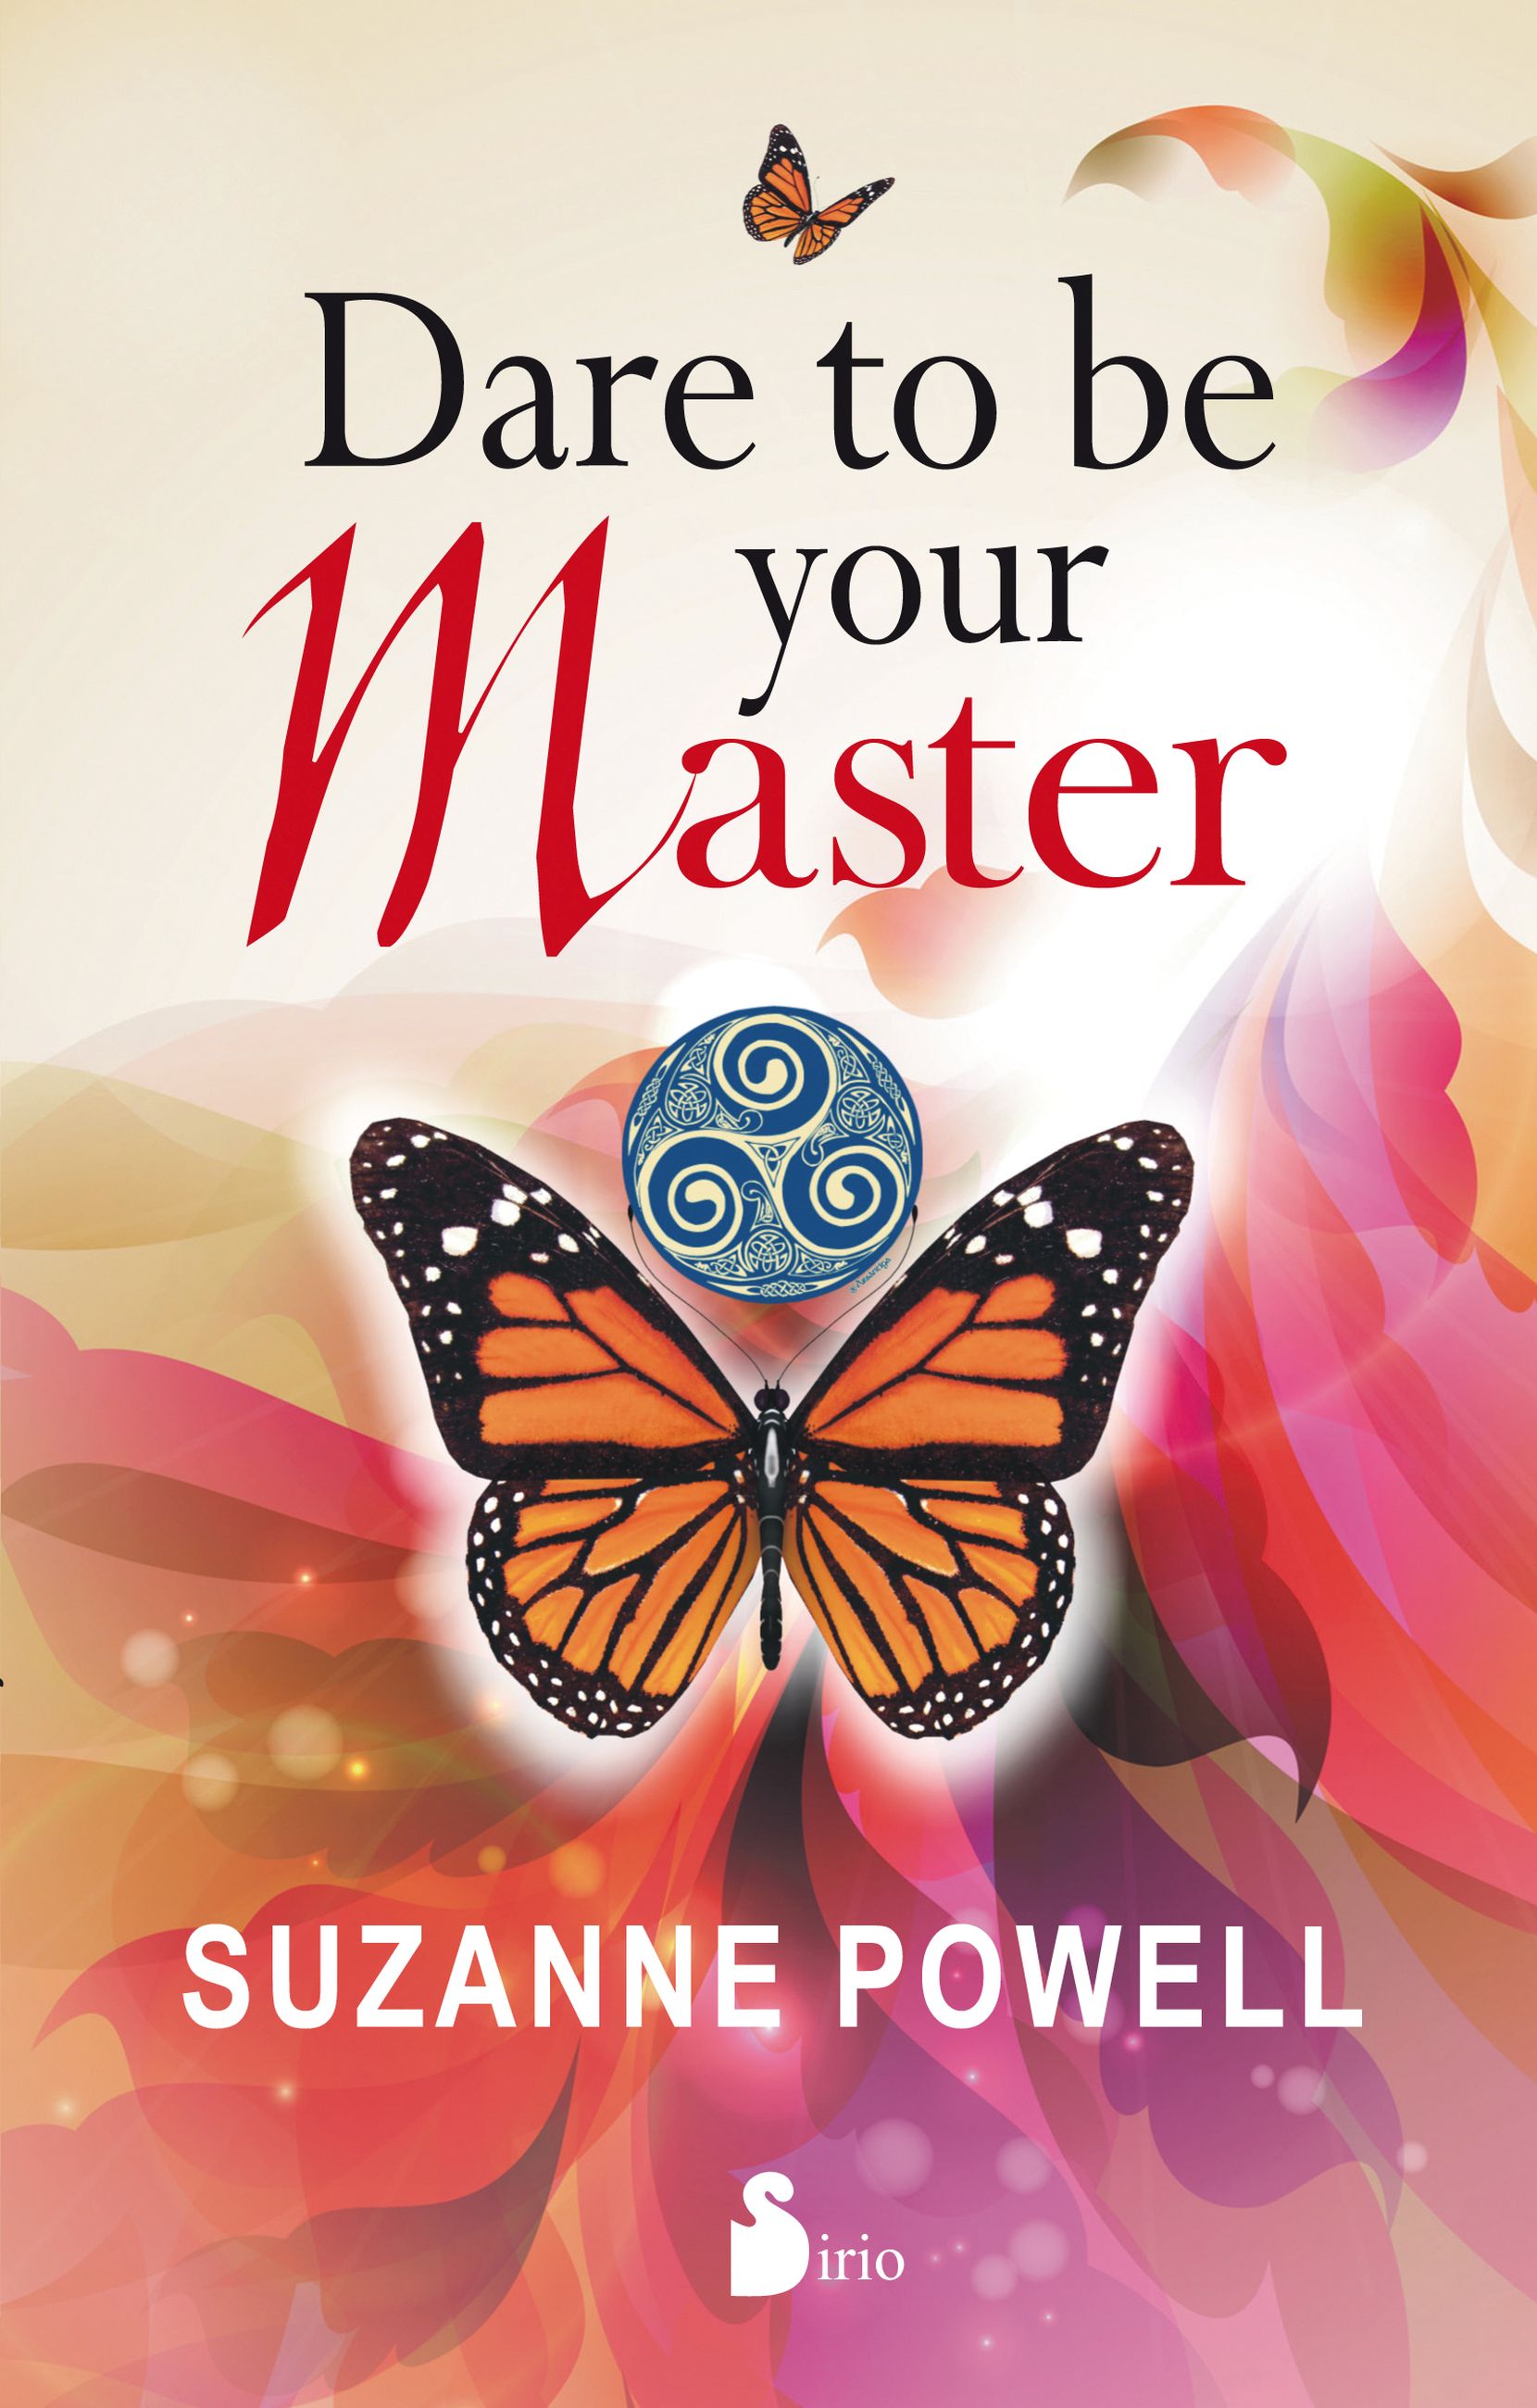 DARE TO BE YOUR MASTER (9788416233861)